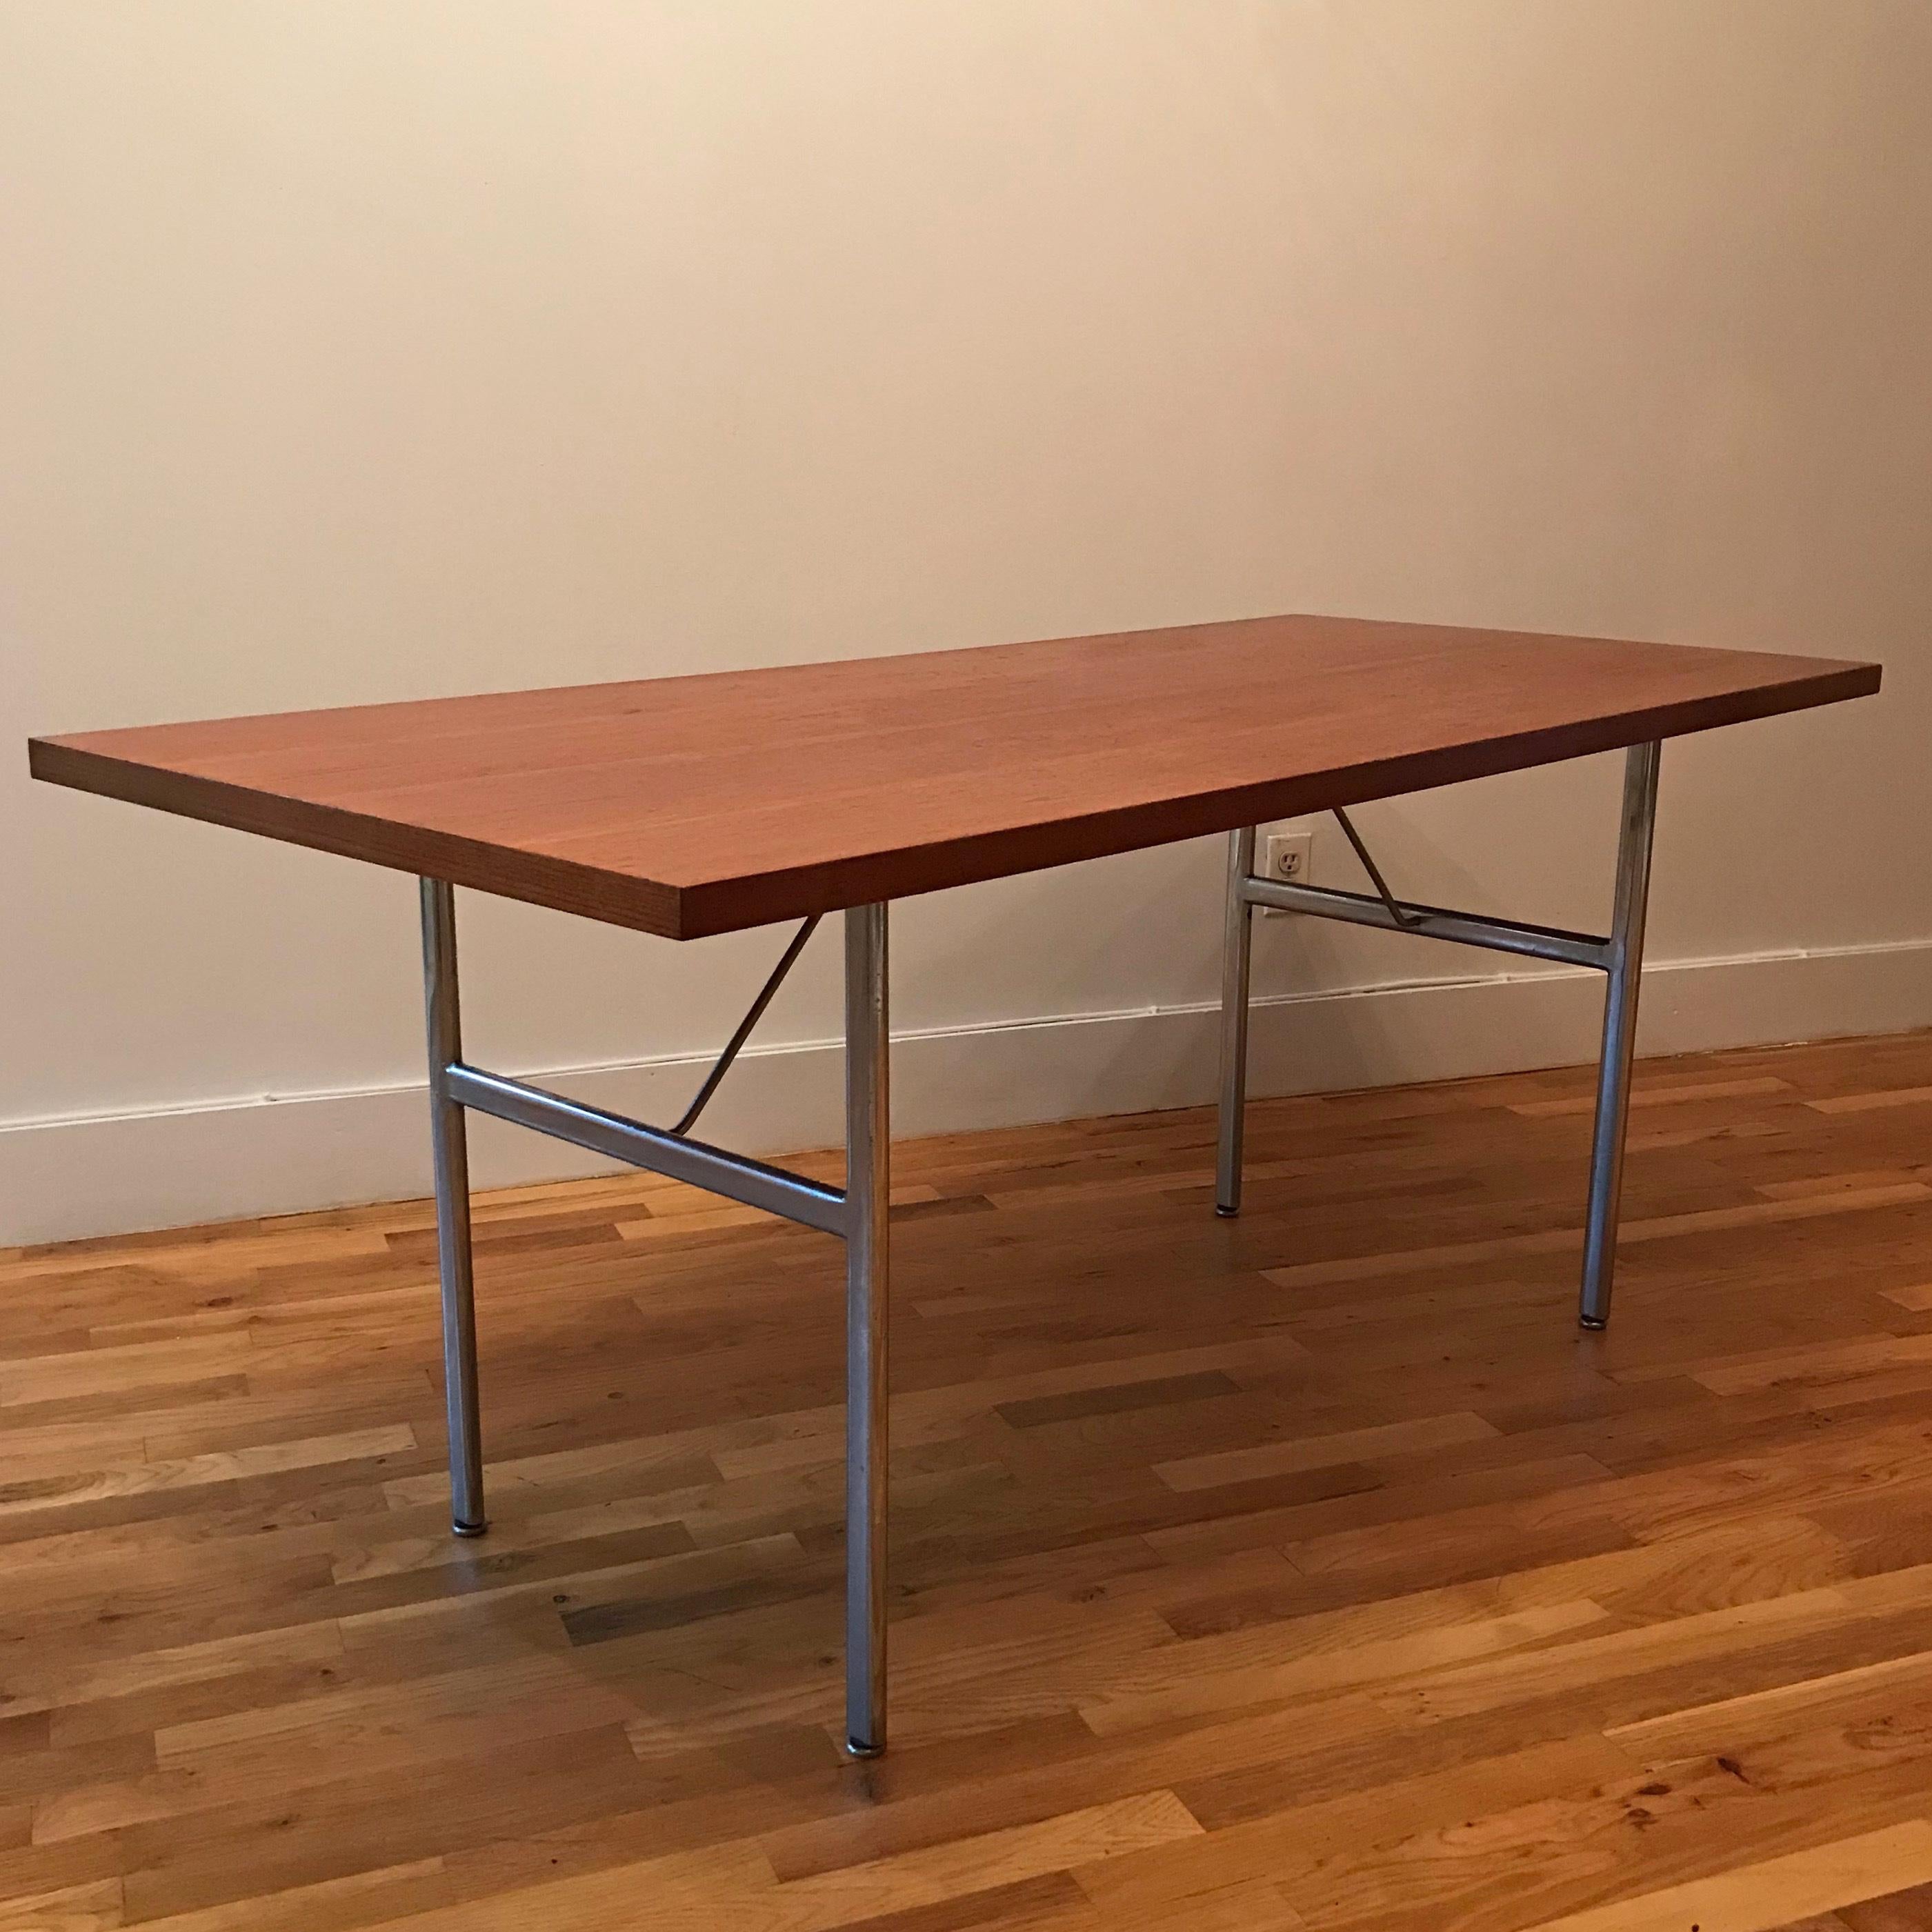 Mid-Century Modern dining table by George Nelson for Herman Miller features a steel H frame base with chestnut top.